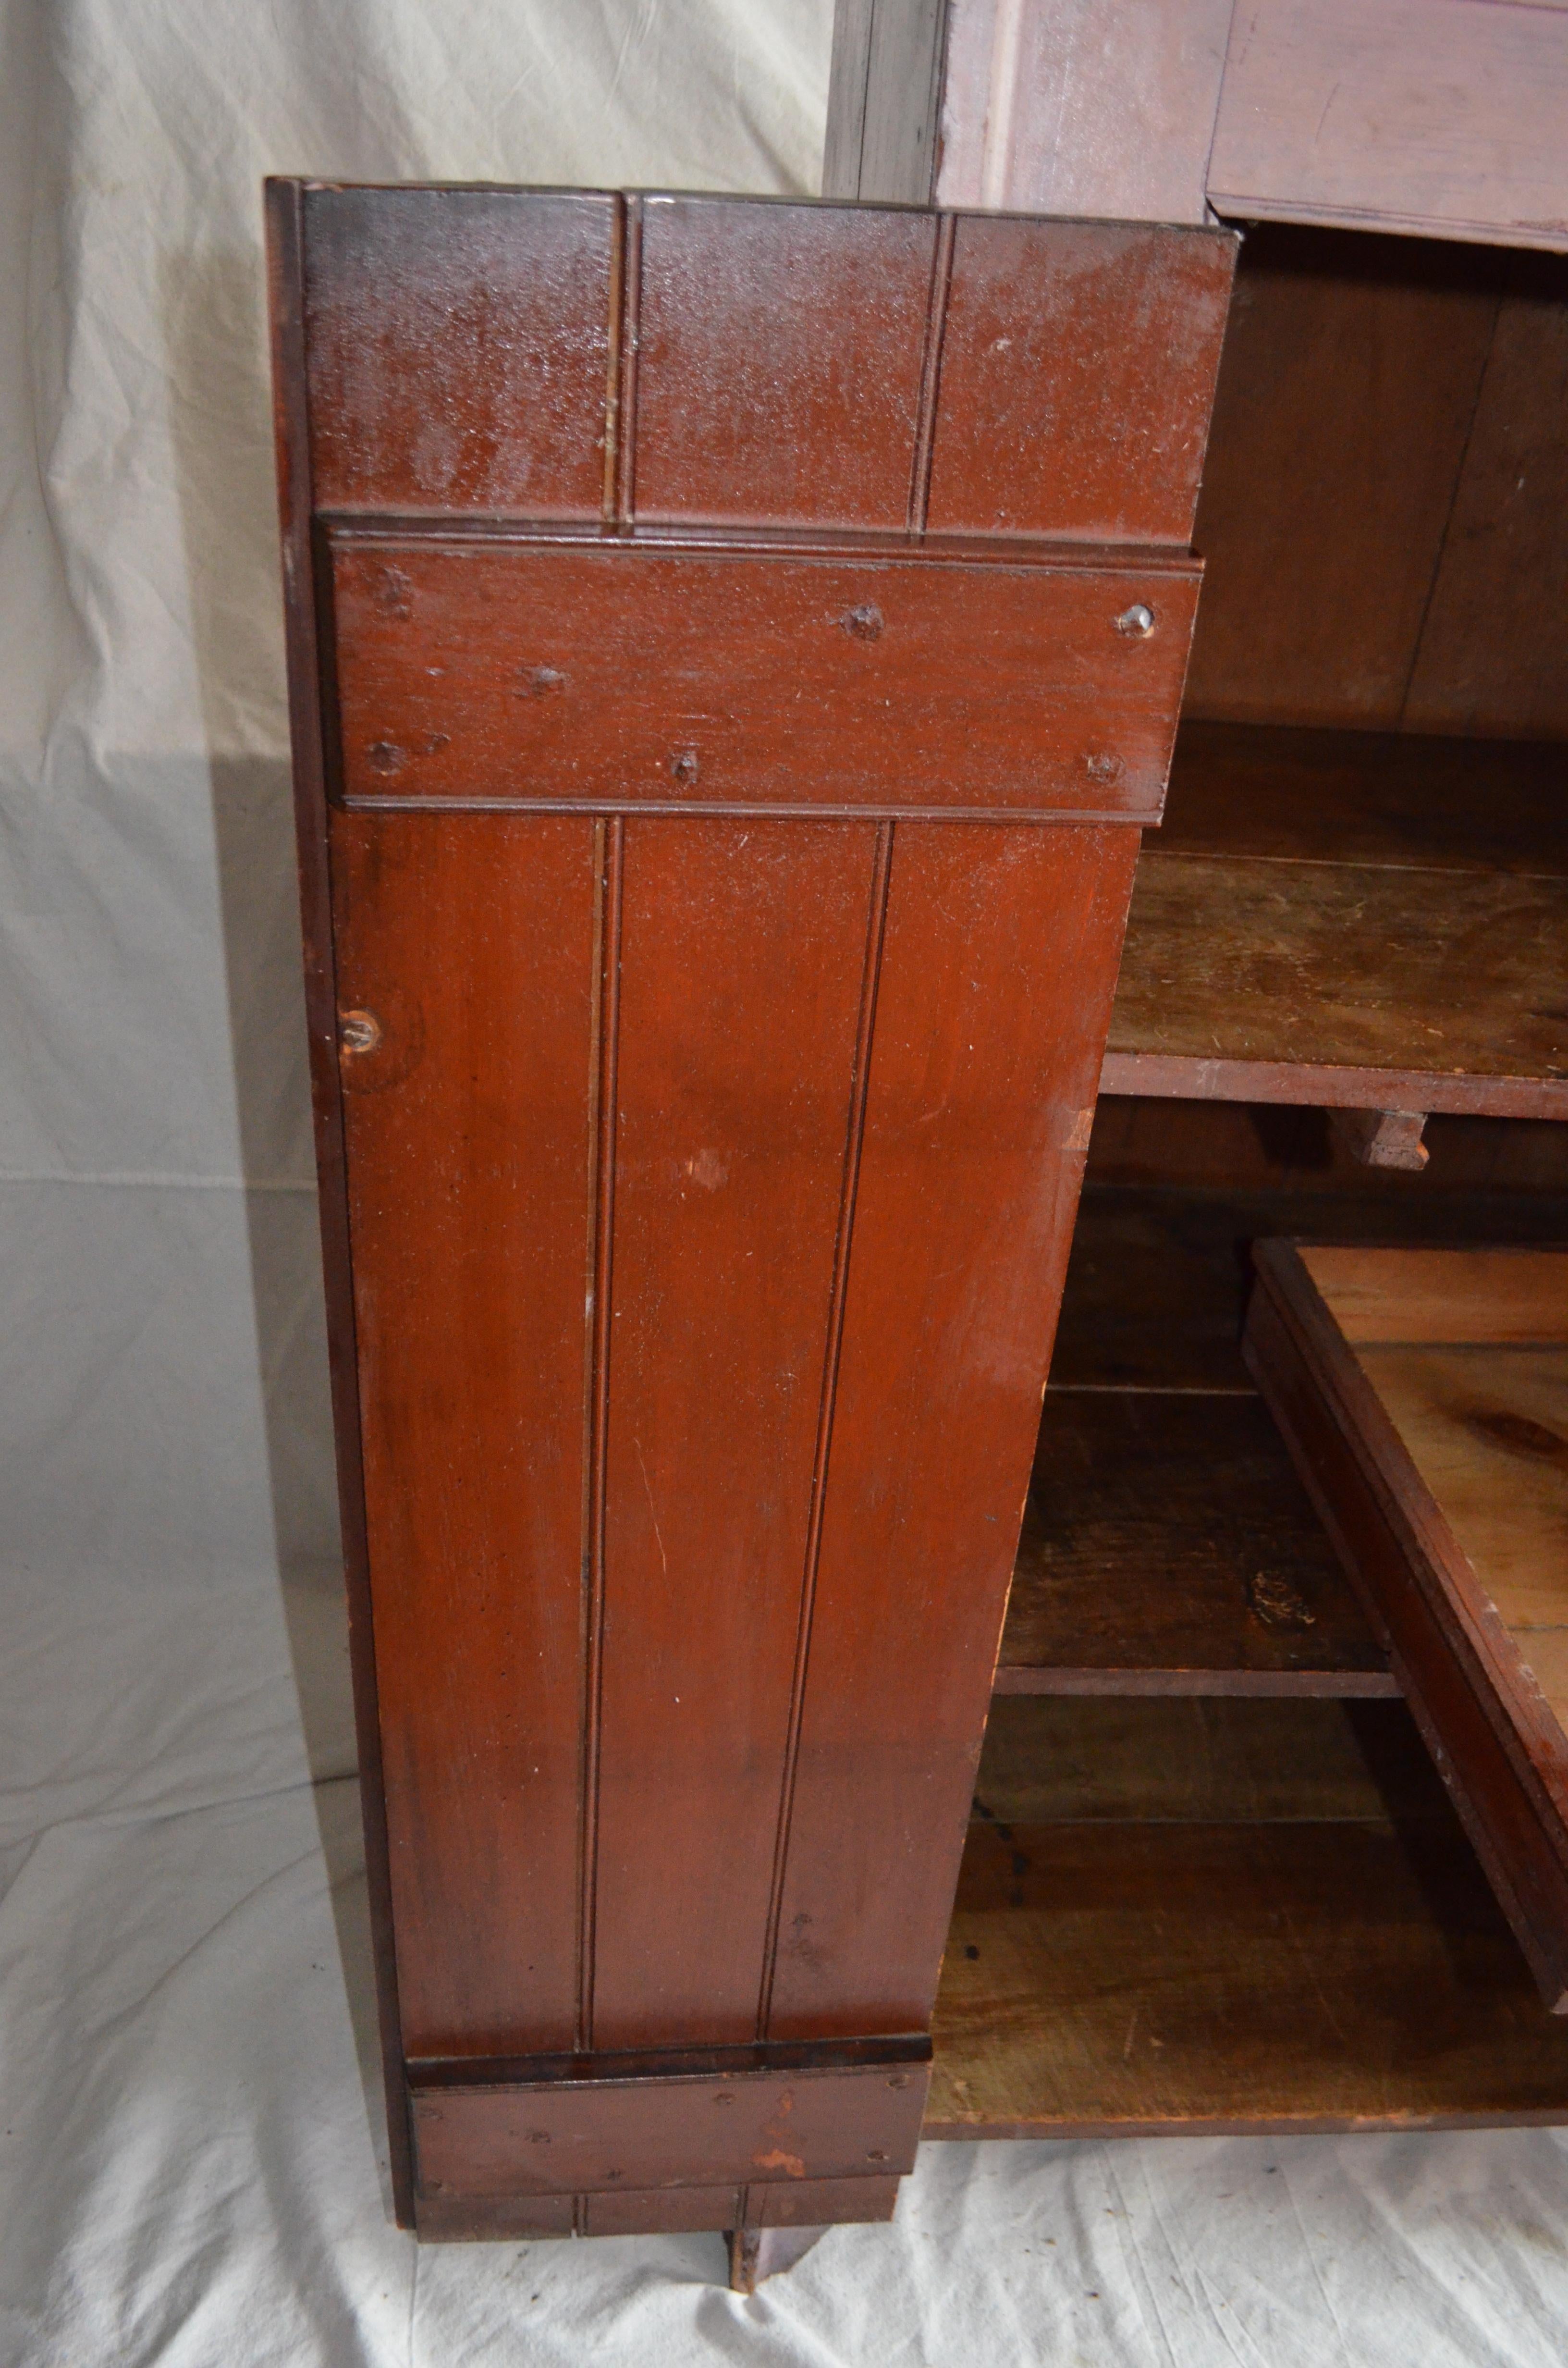 Early 1800s Cupboard for Parlor, Kitchen, Pantry with Lockbox Inside 10